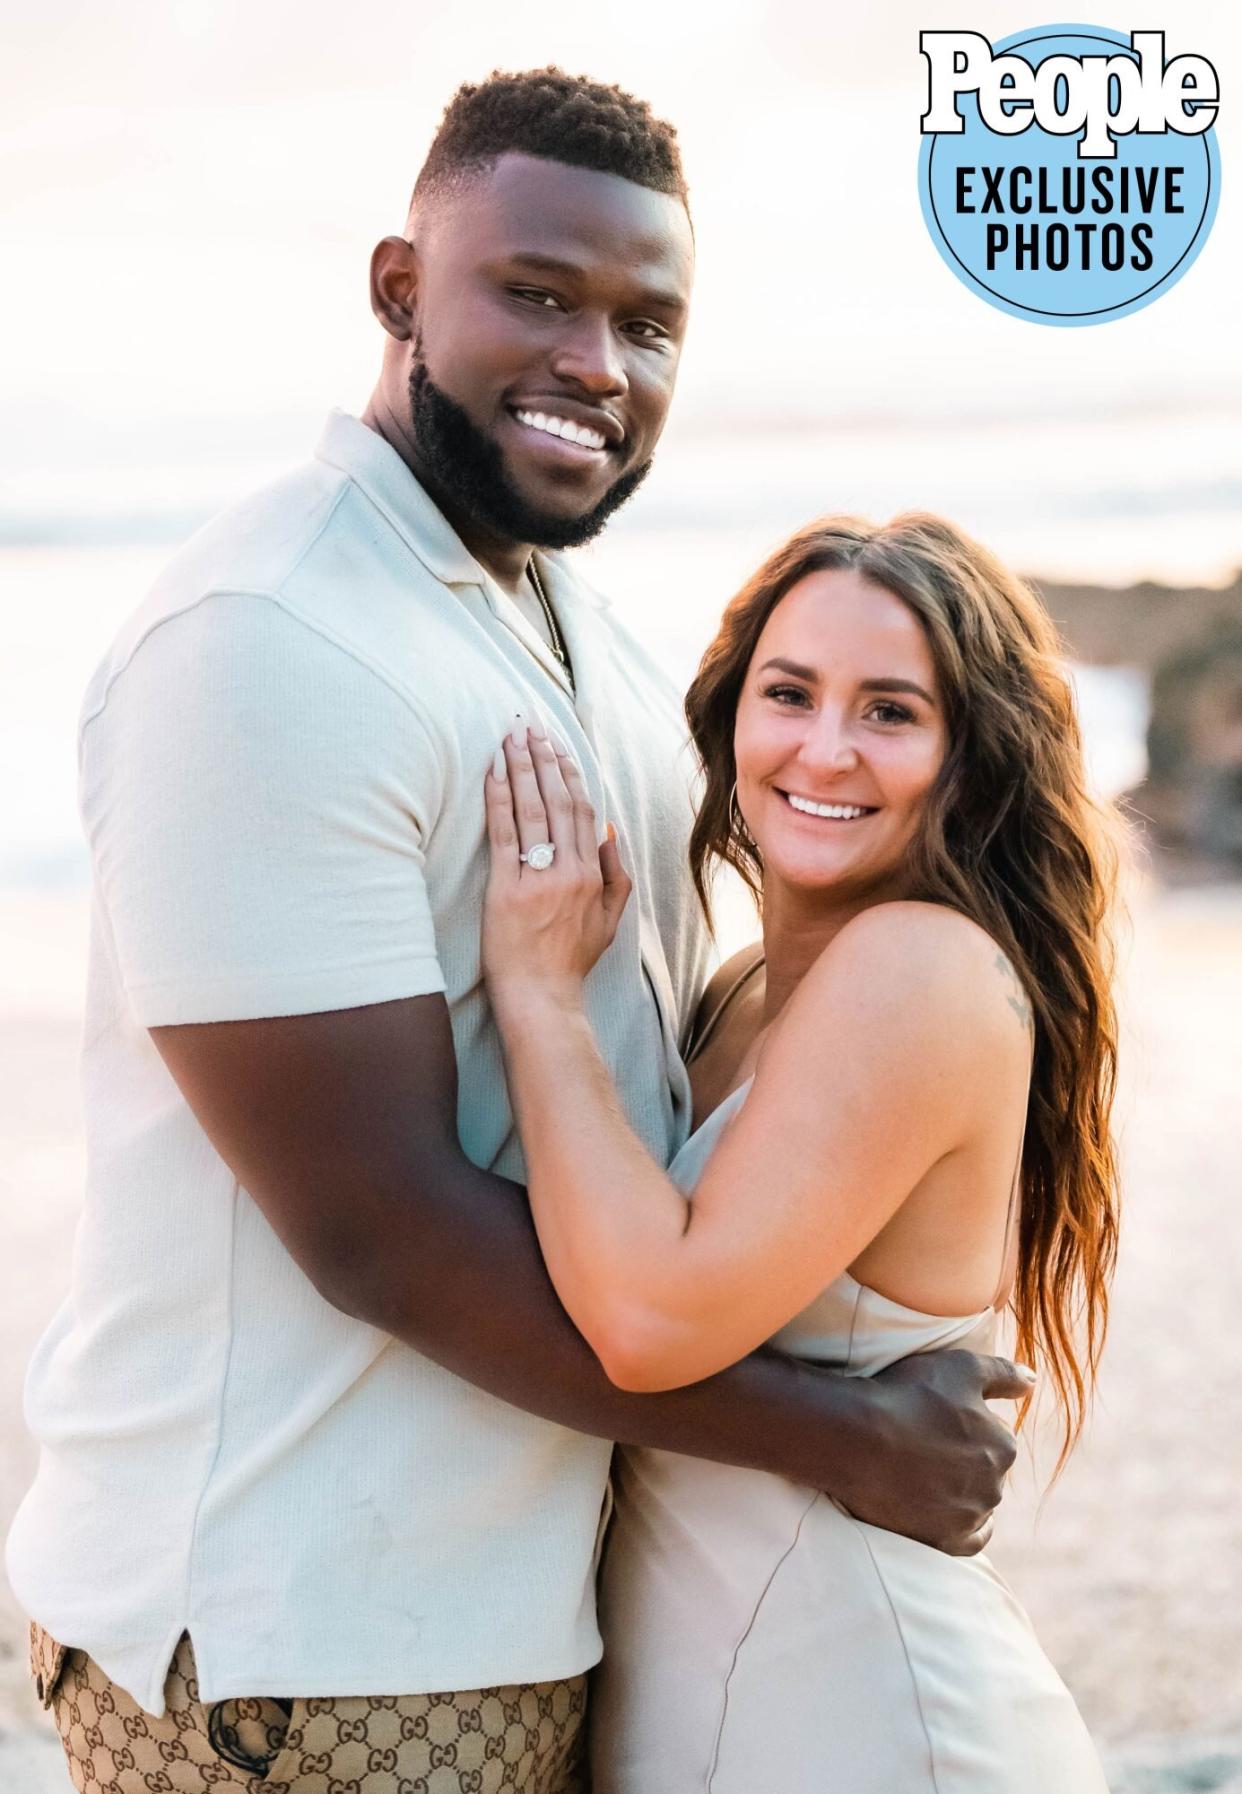 Teen Mom's Leah Messer Is Engaged to Jaylan Mobley: 'I Couldn't Imagine Myself Being Anywhere Else' Credit: Vision Stream Productions